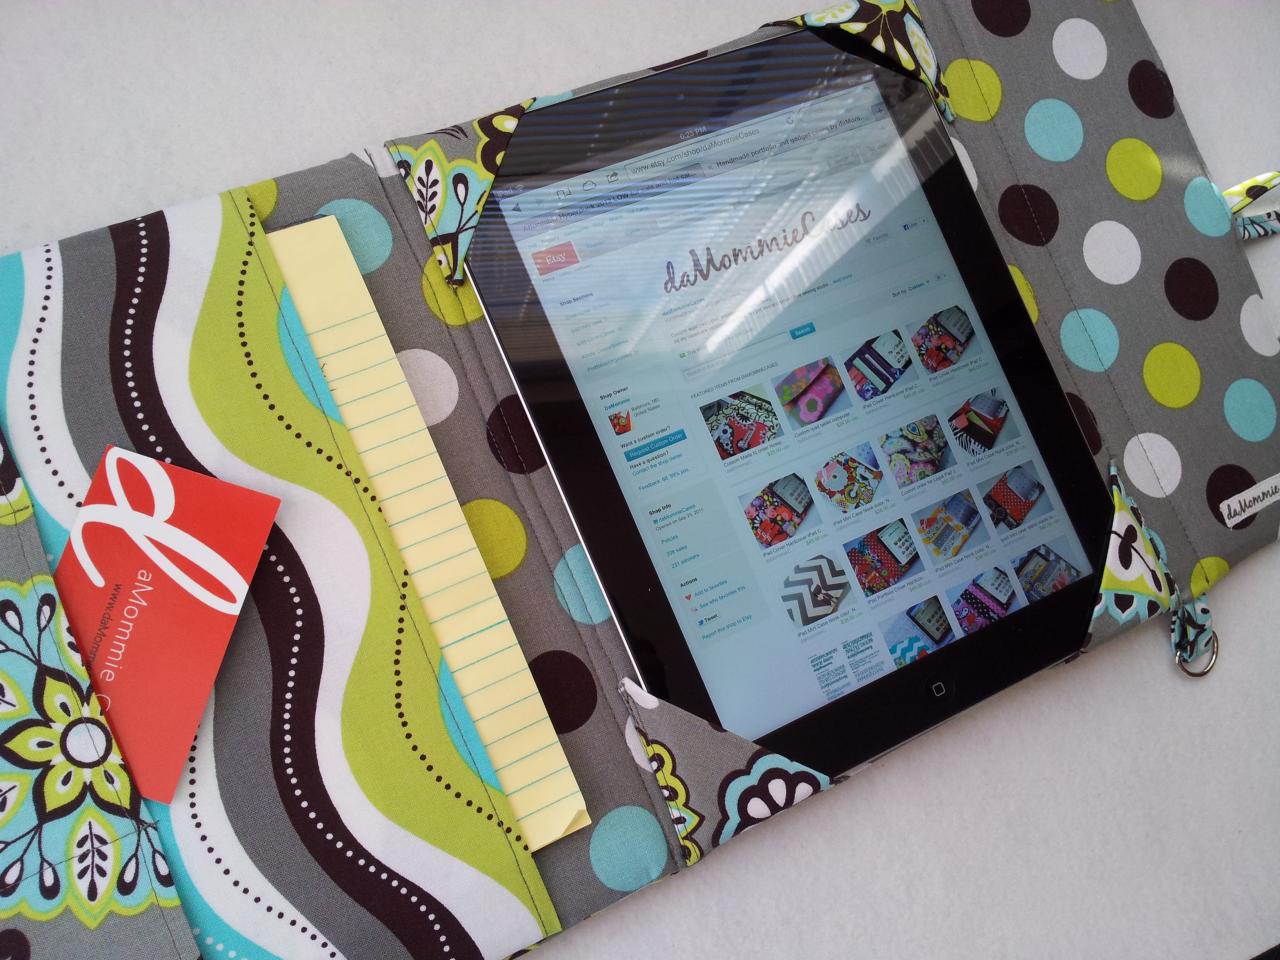 Ipad Case Cover Bag Messenger Style Bag Made To Order